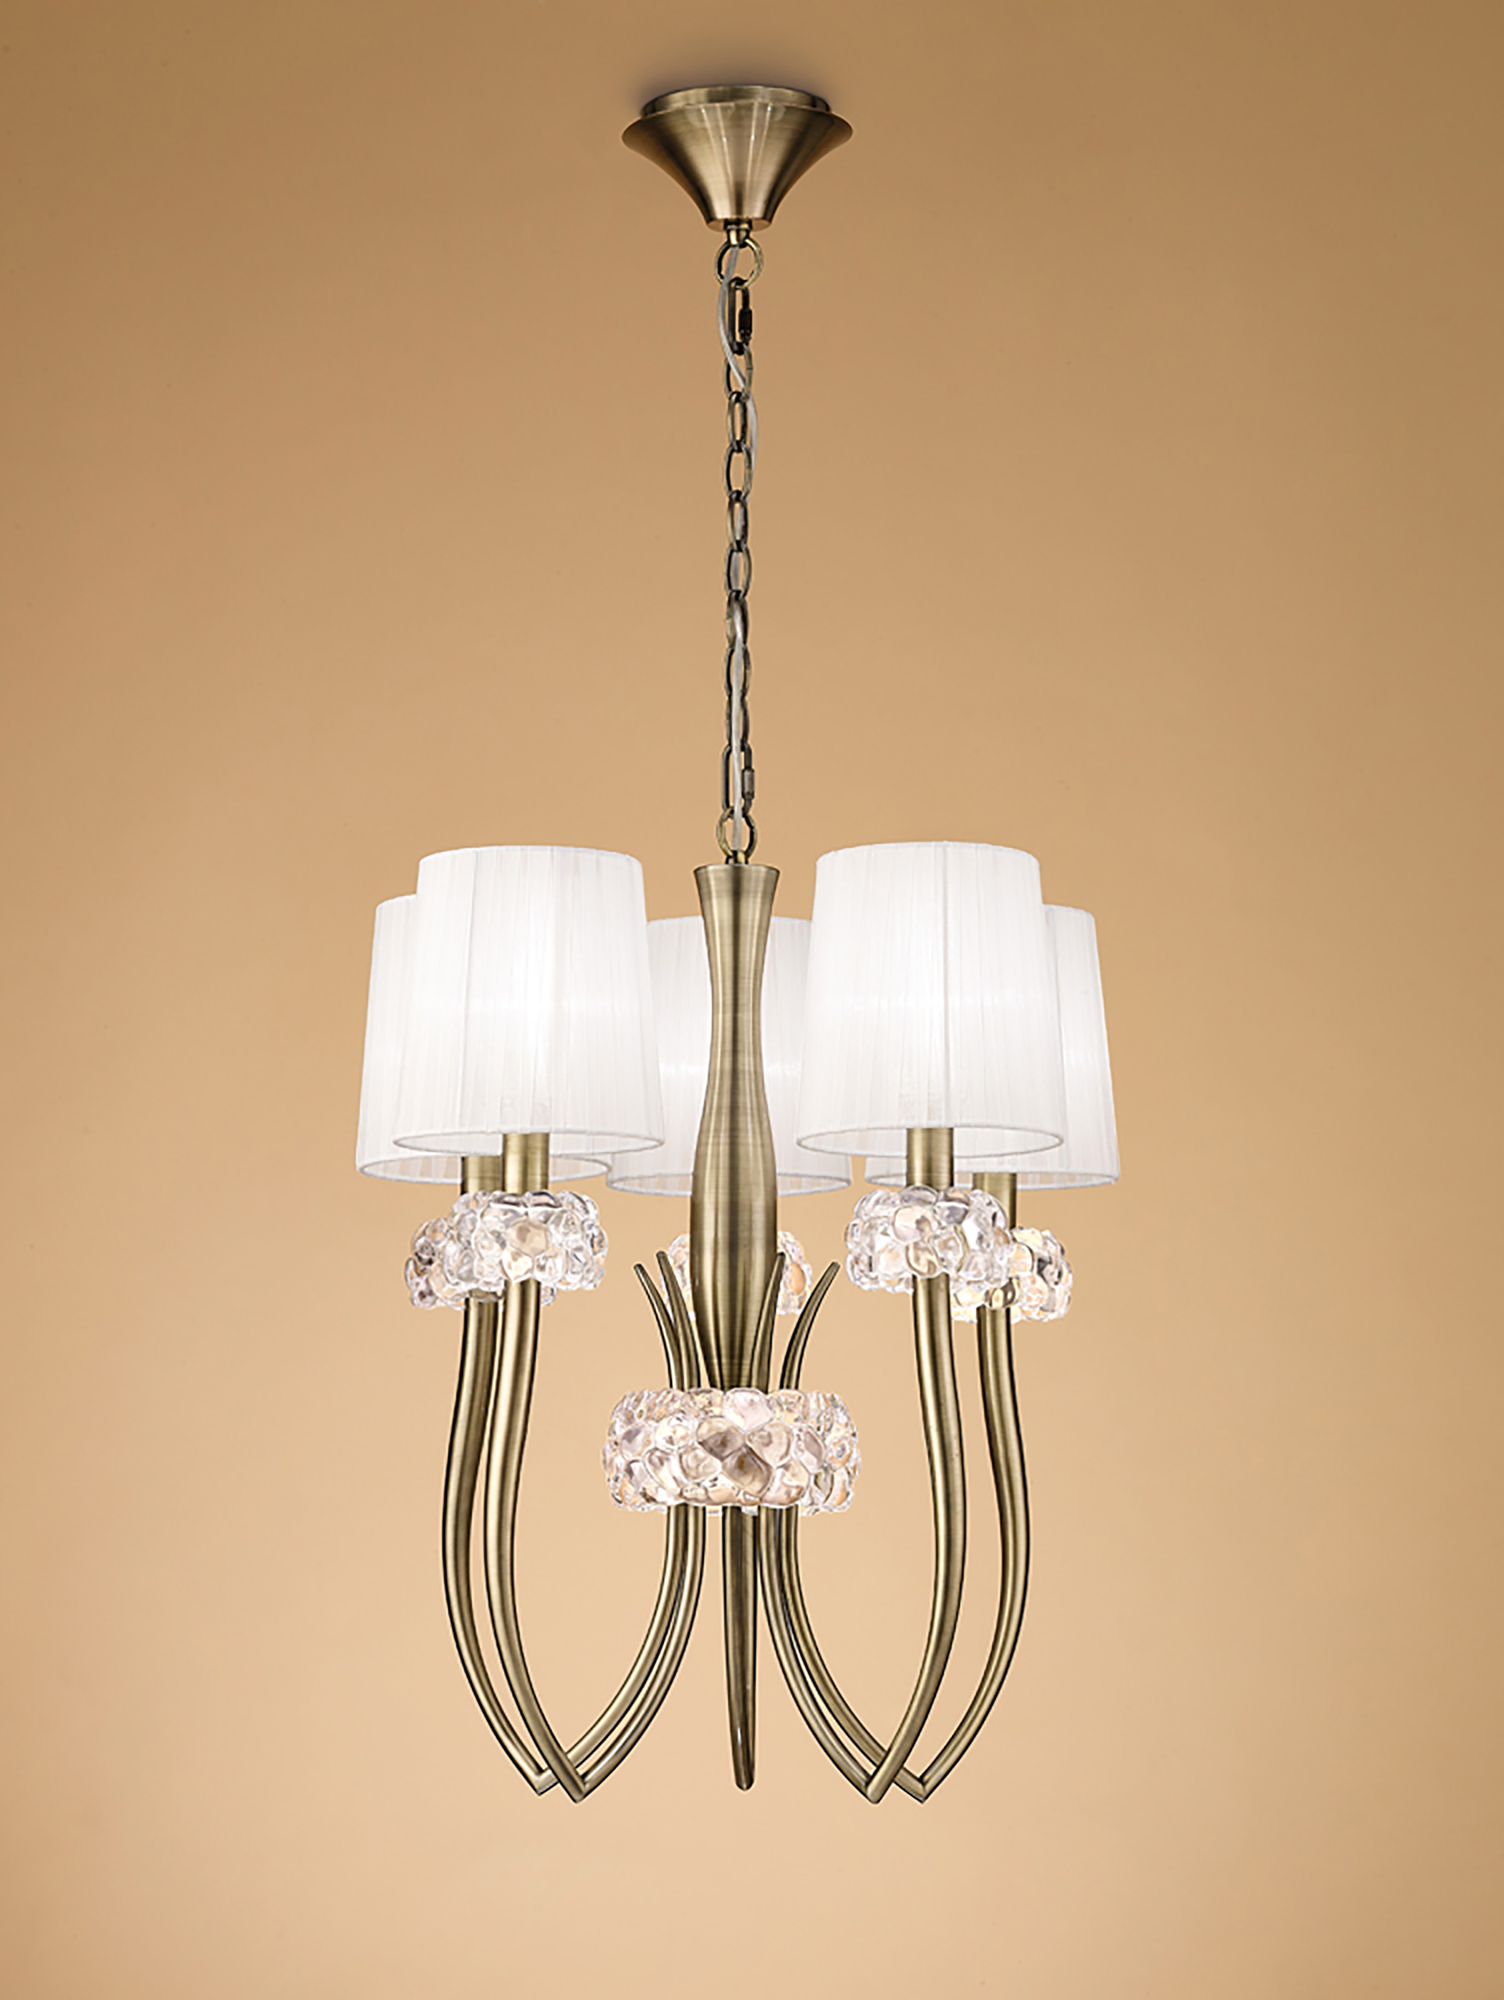 Loewe Antique Brass-White Ceiling Lights Mantra Multi Arm Fittings